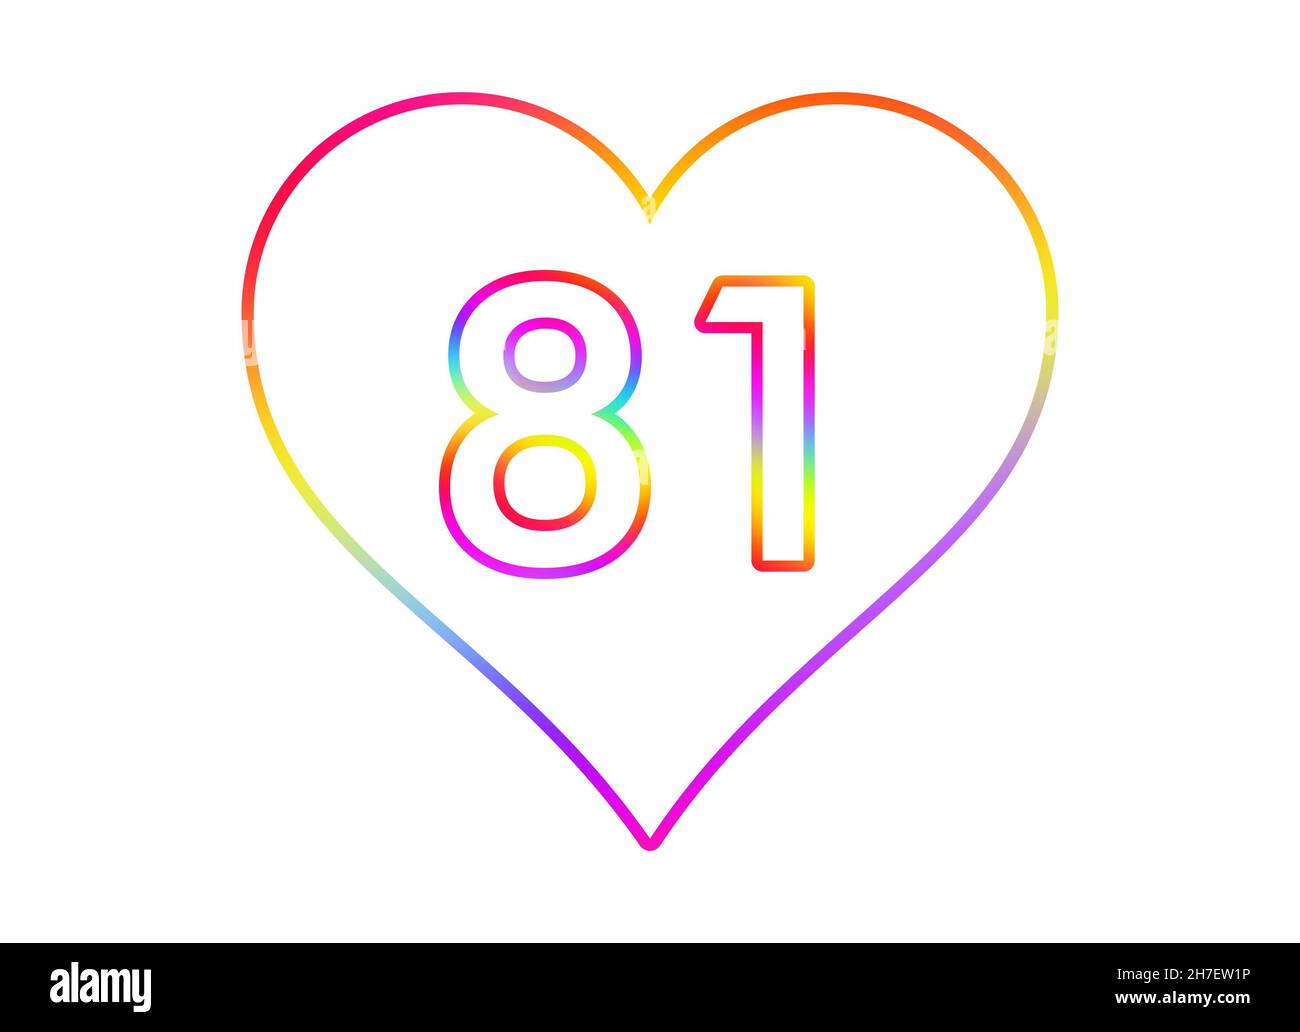 Number 81 into a white heart with rainbow color outline. Stock Photo